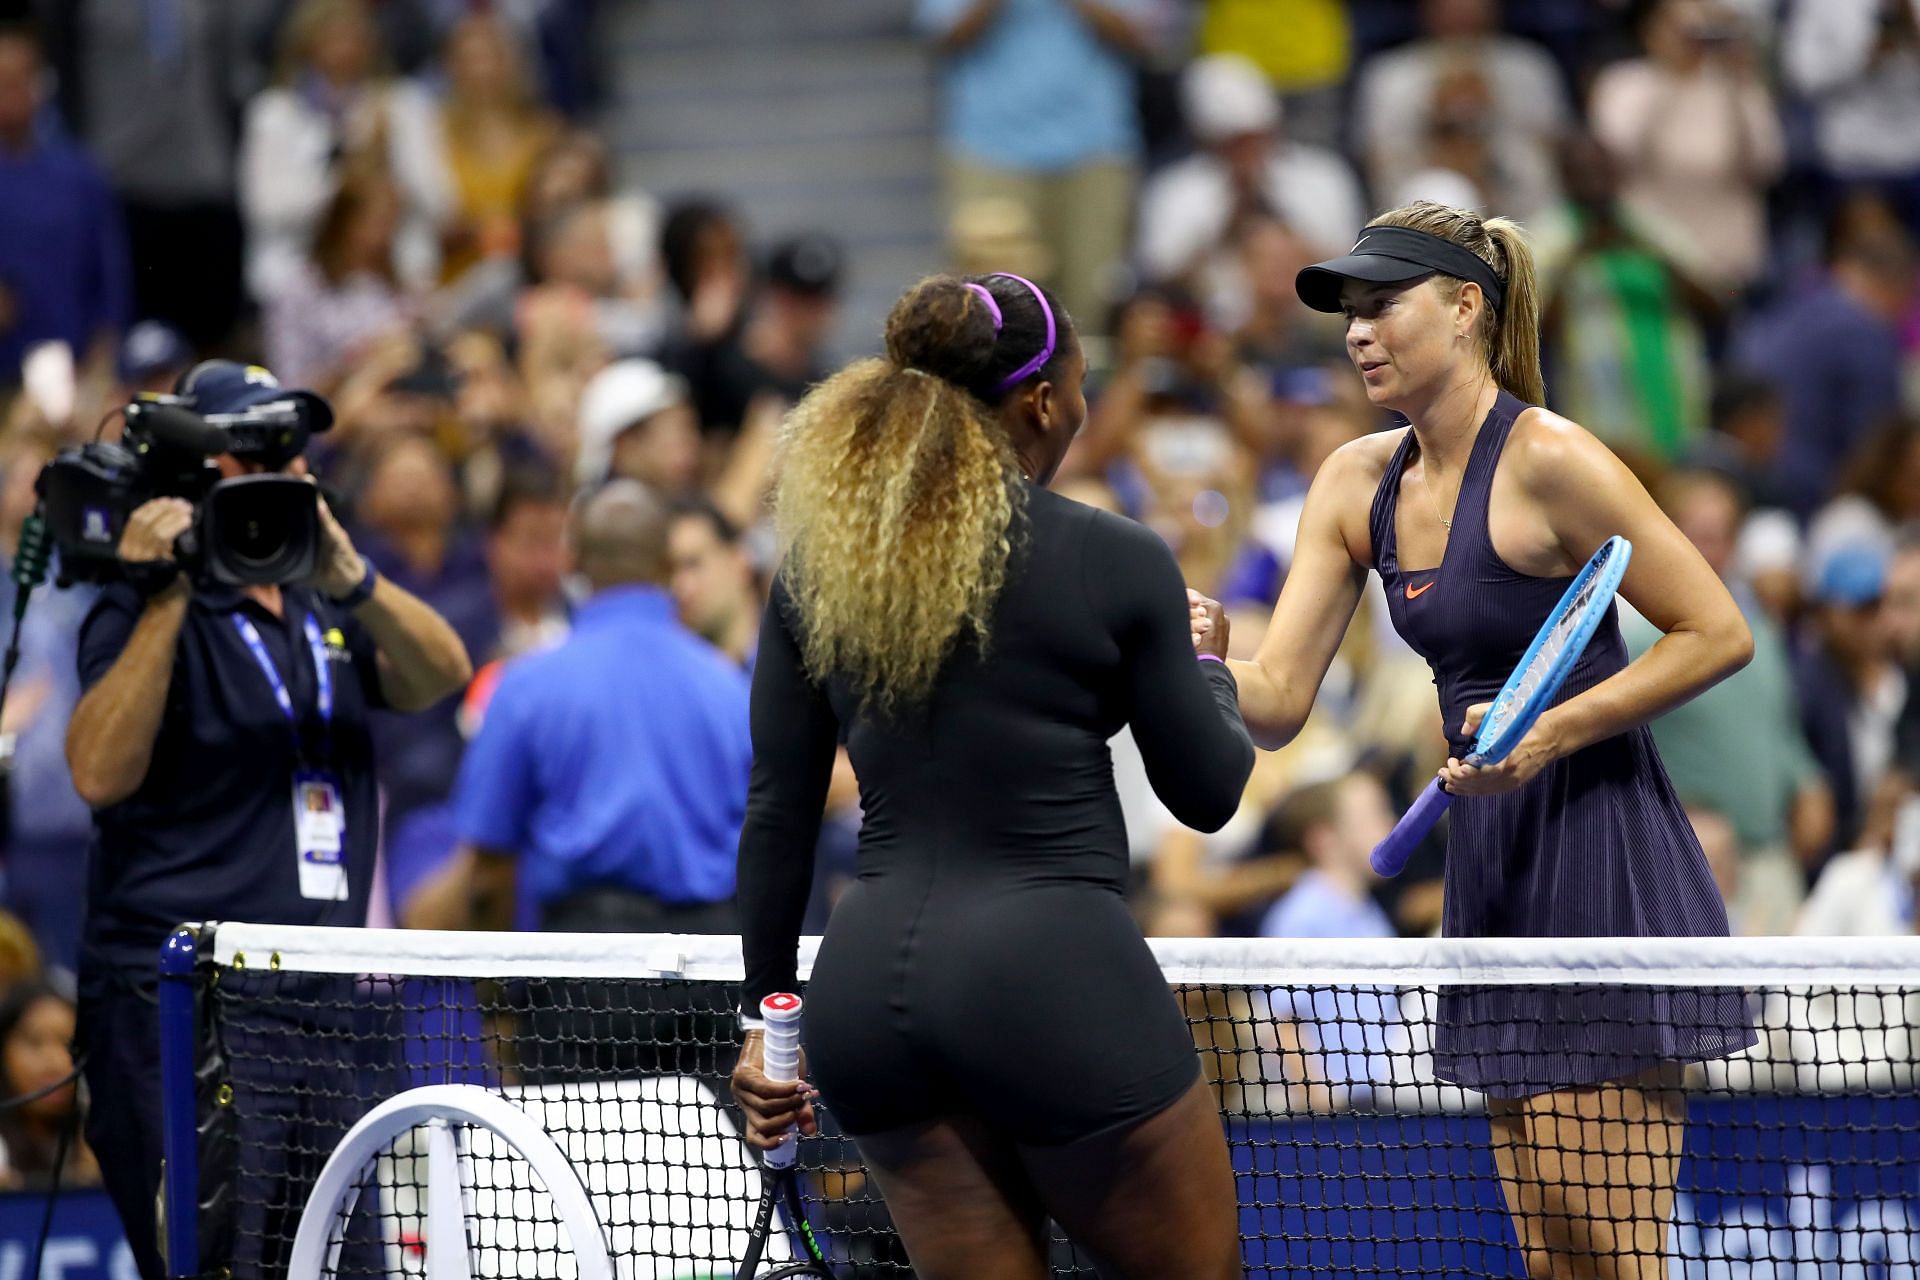 Maria Sharapova and Serena Williams after their match at the 2019 US Open